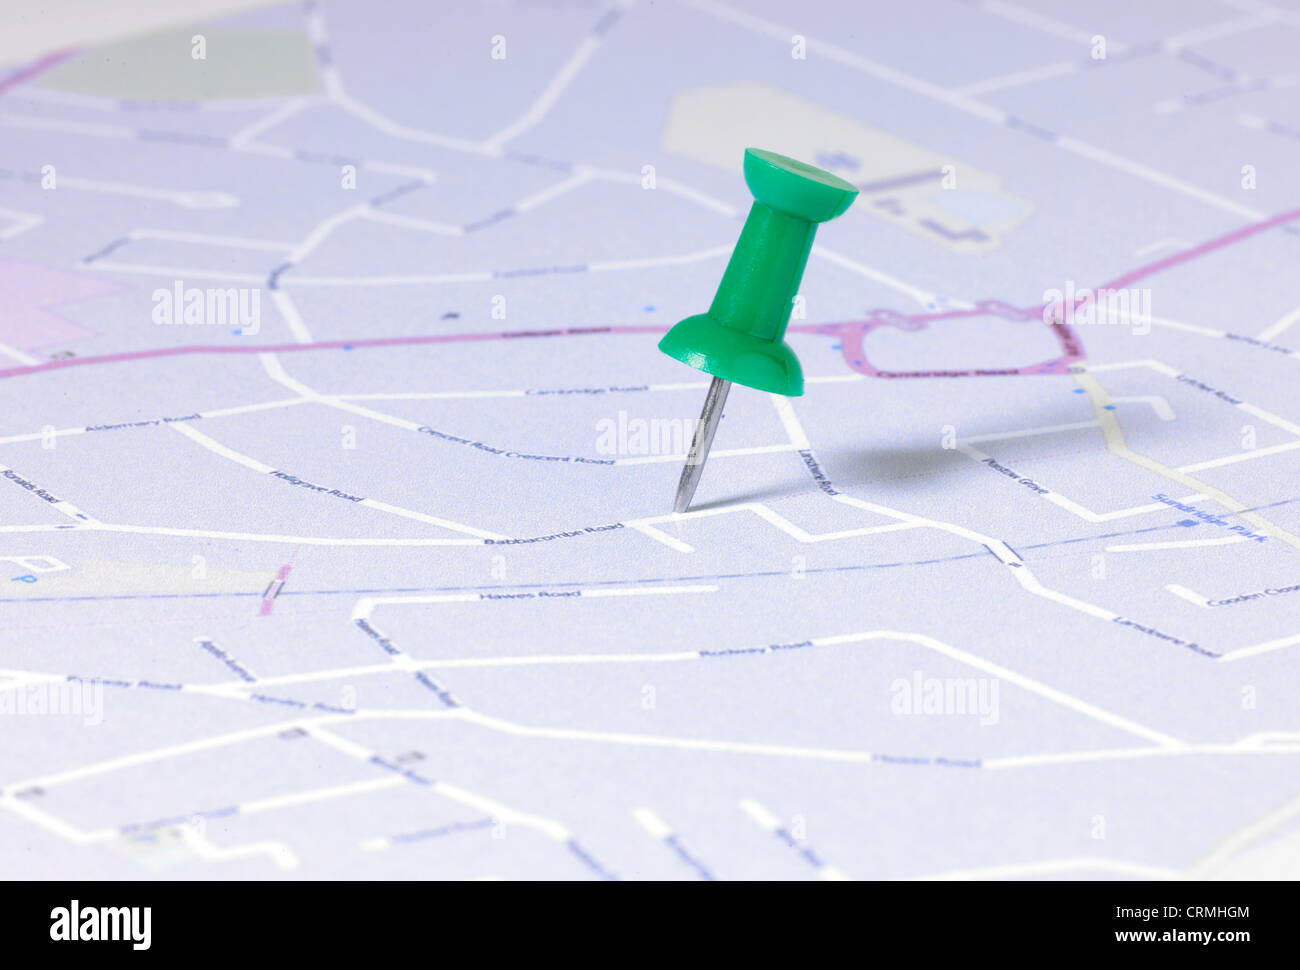 detail of a green map pin in English street map Stock Photo